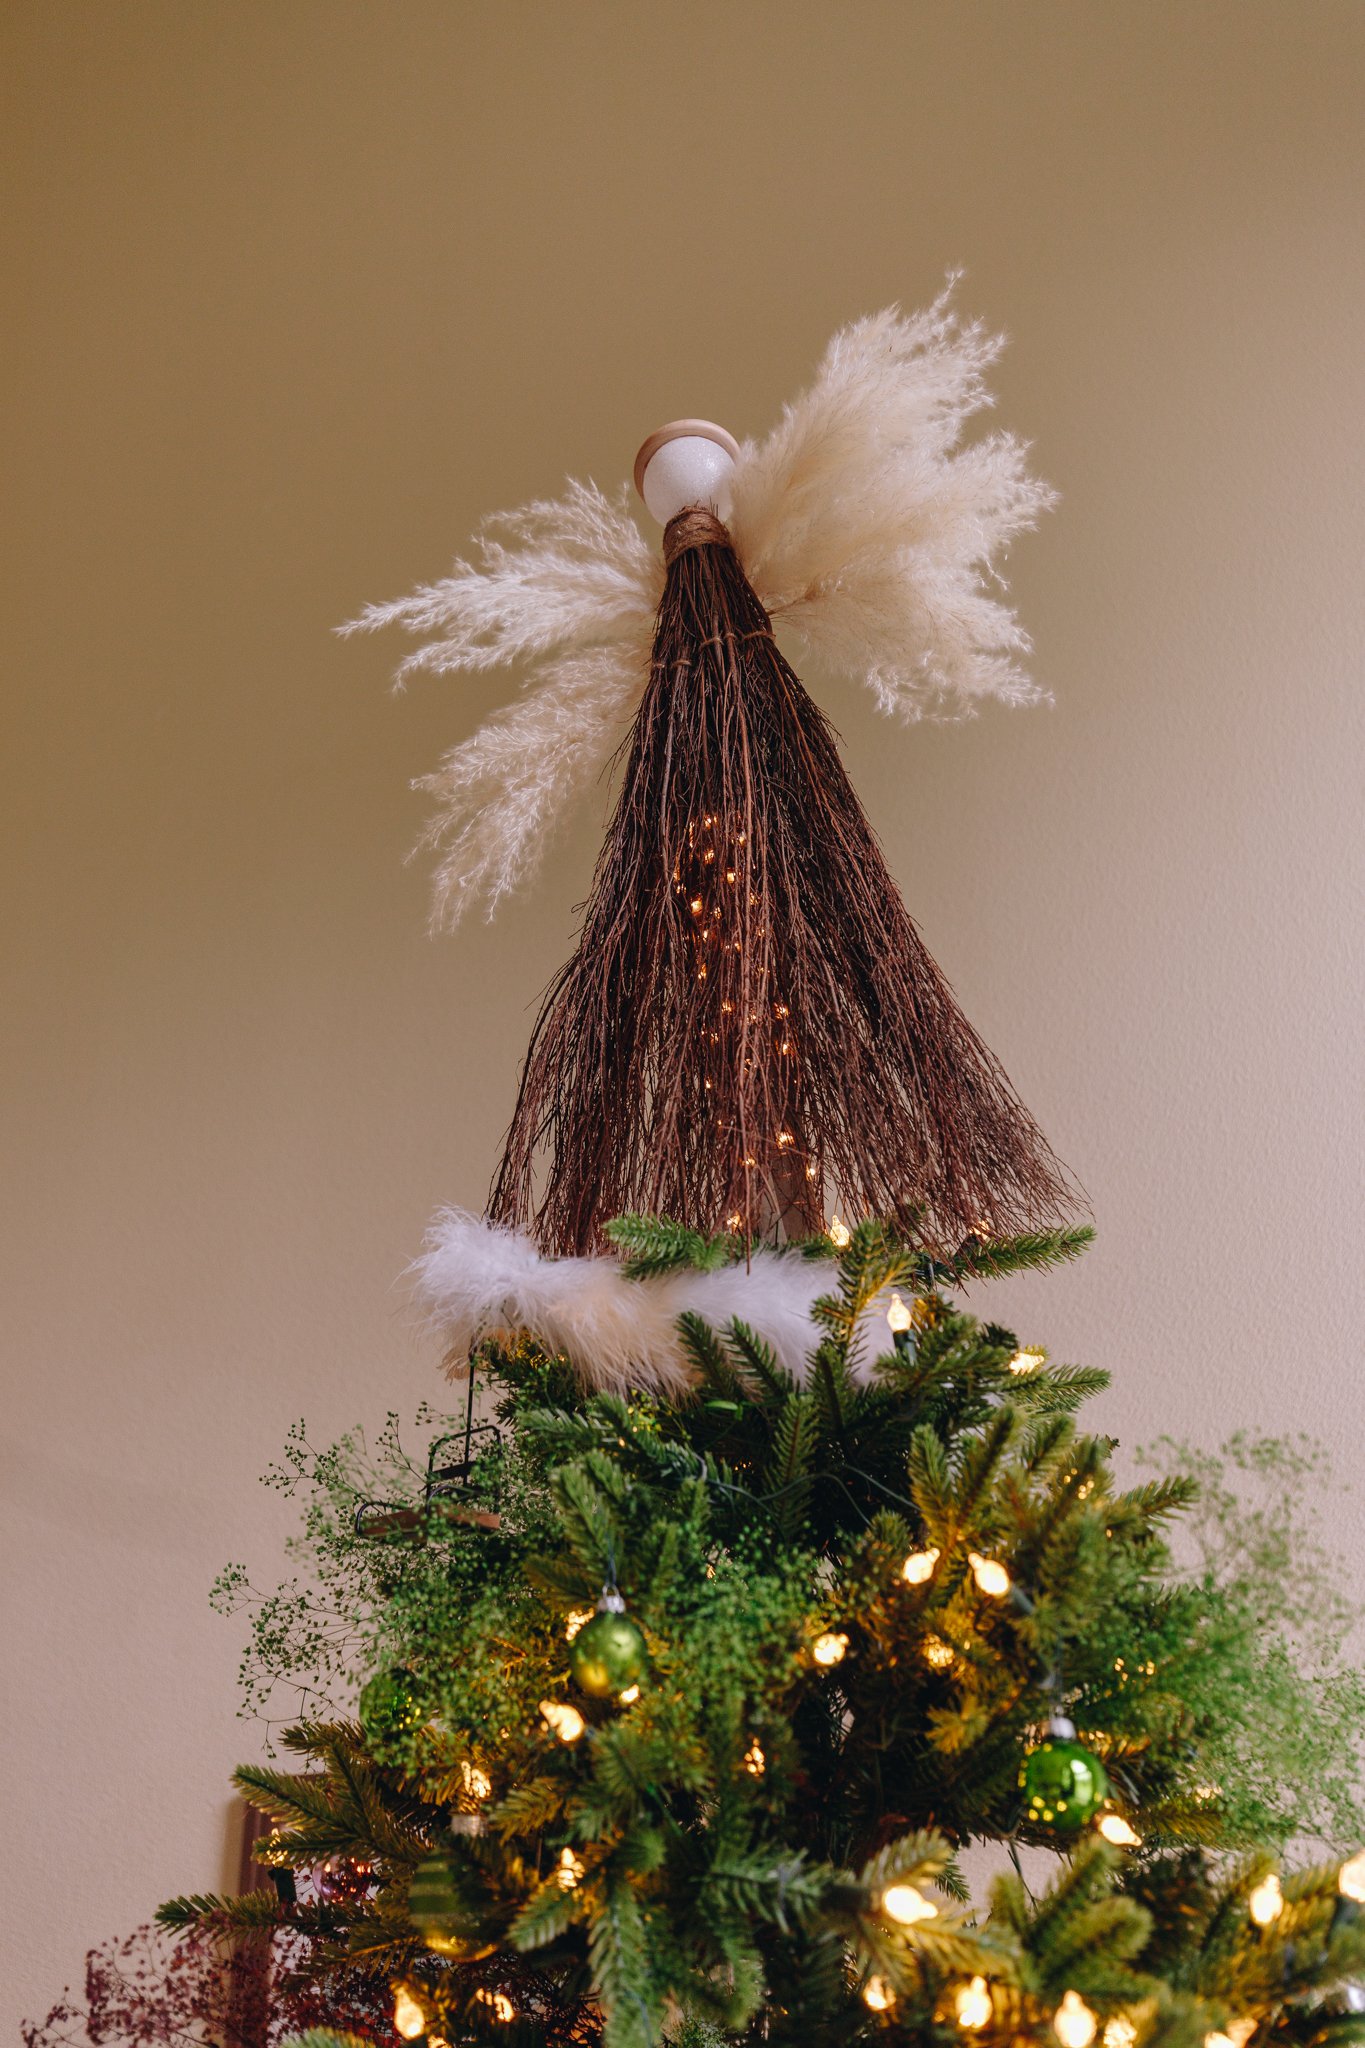  angel craft out of scented broom from home depot and dried pampas grass for your Christmas tree  